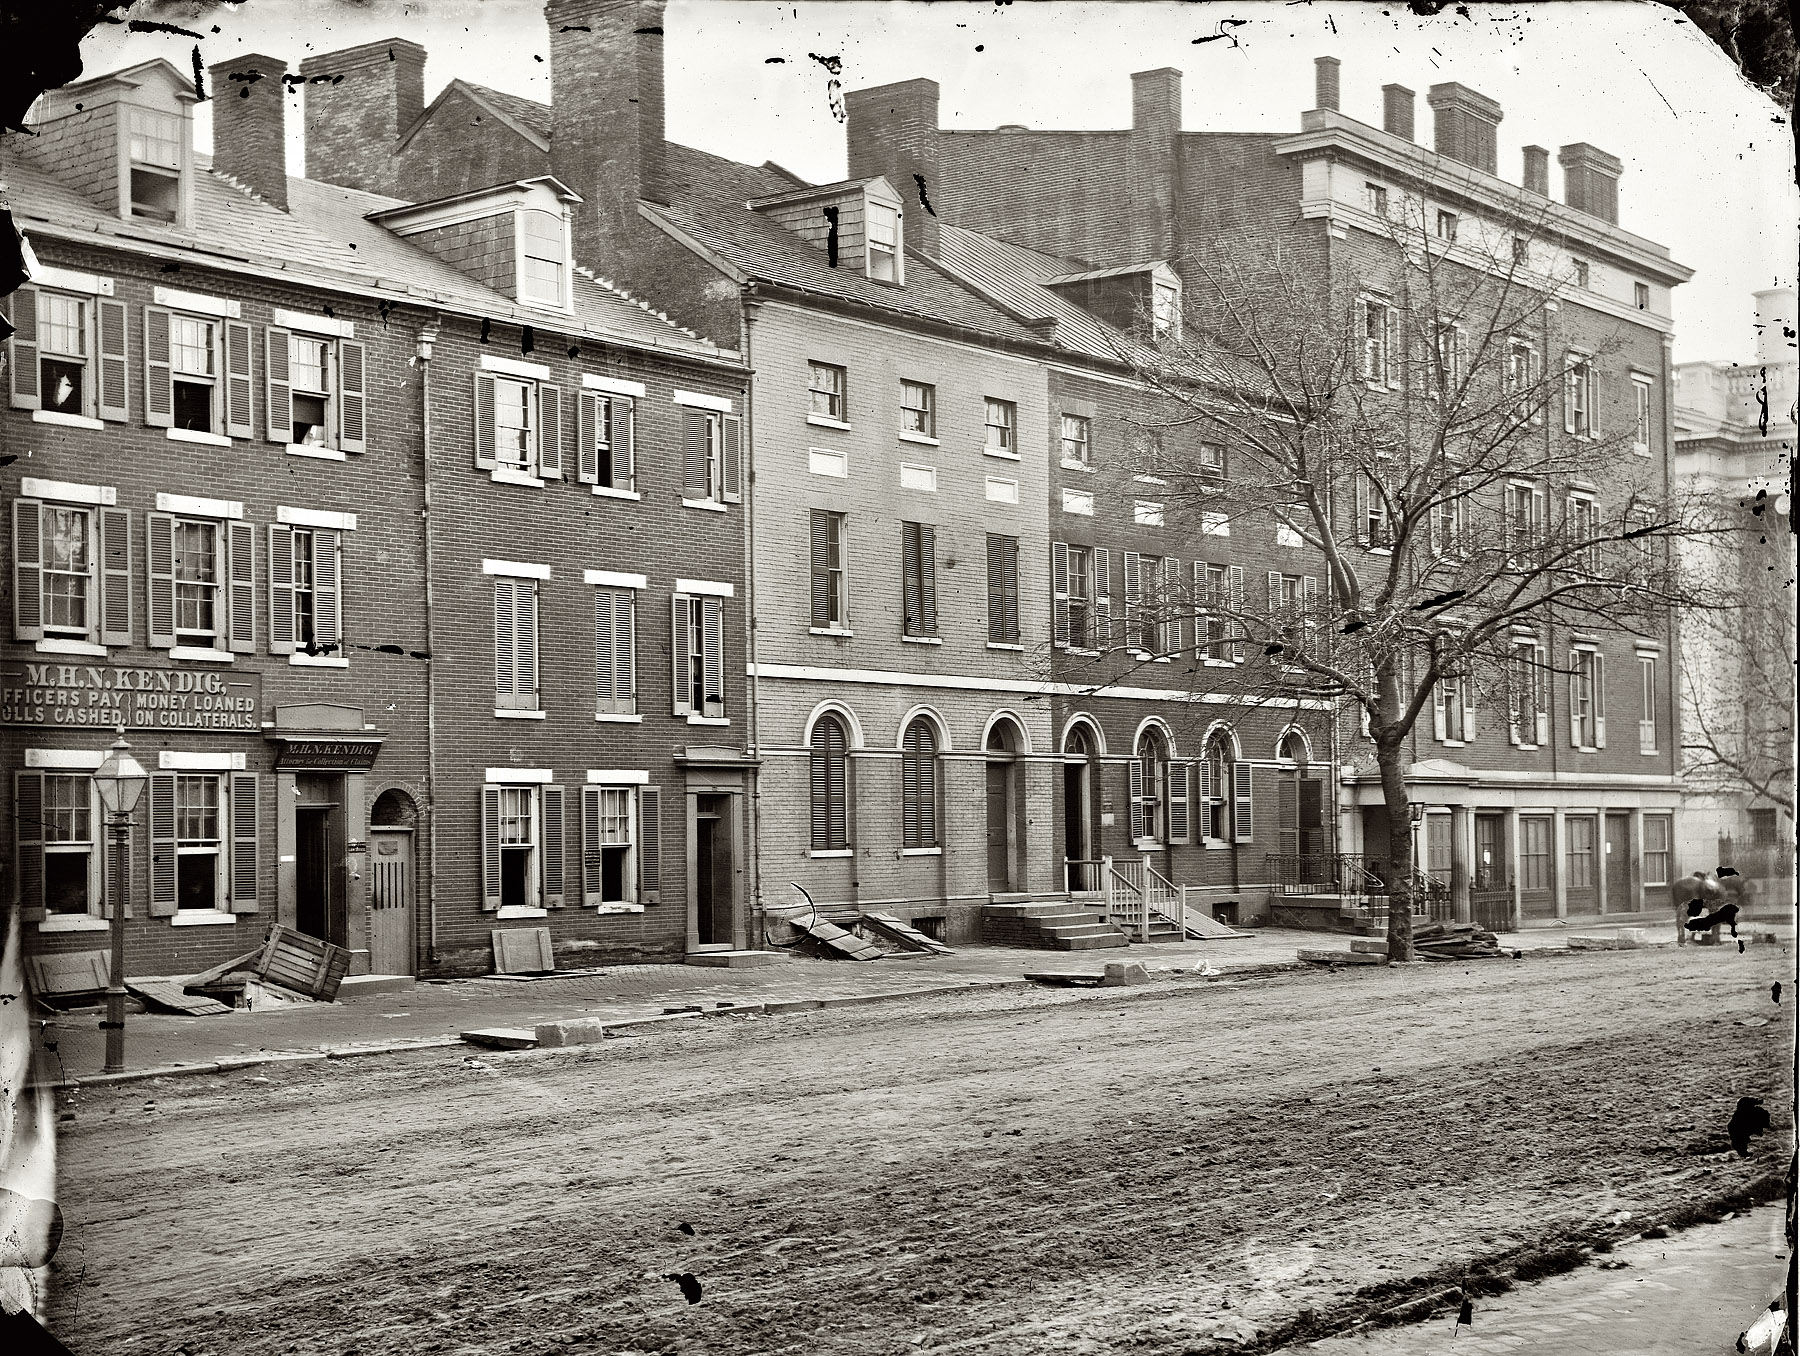 April 1865. "Washington, District of Columbia. Sanitary Commission storehouse and adjoining houses at 15th and F Streets N.W." Wet plate glass negative, photographer unknown. View full size.